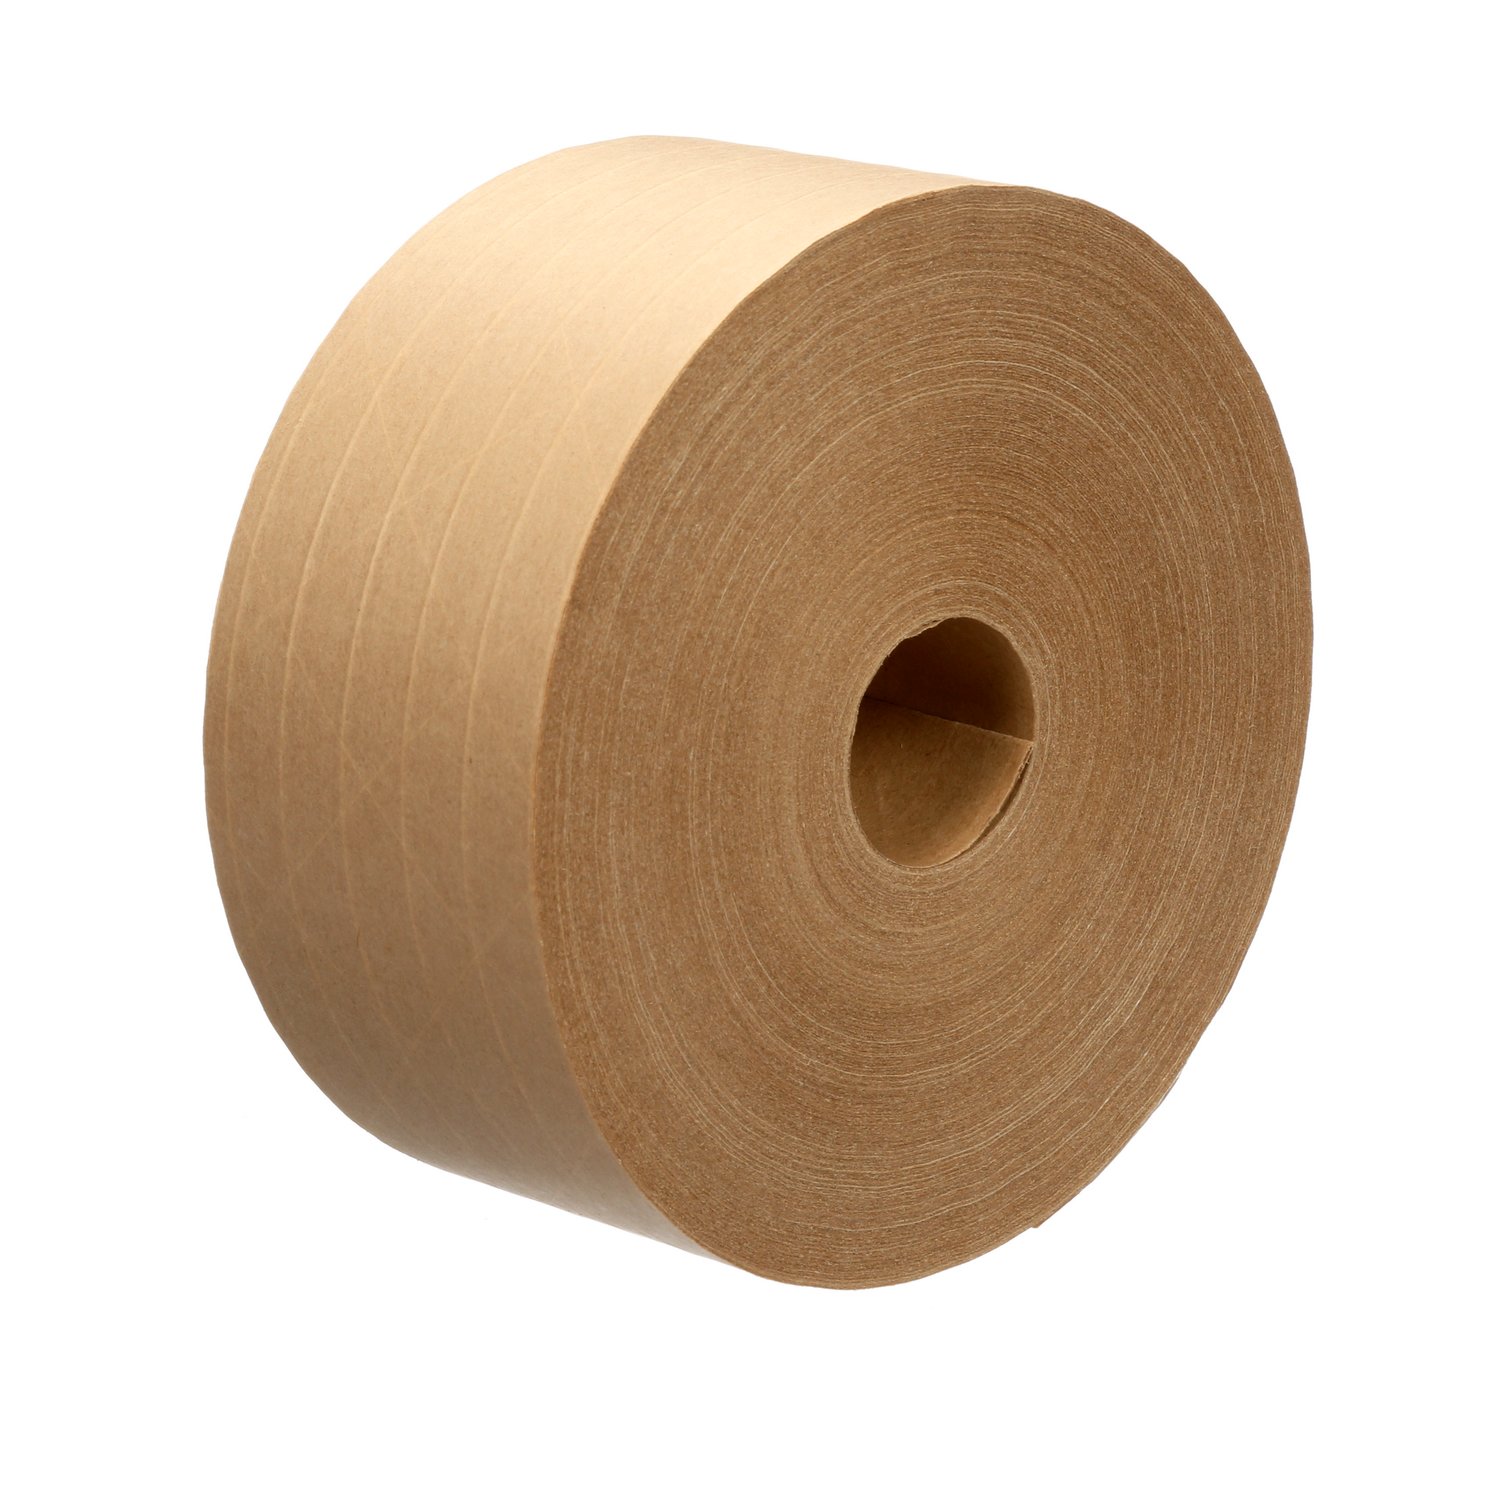 7010335896 - 3M Water Activated Paper Tape 6145, Natural, Light Duty Reinforced, 3
inch x 600 ft, 10/Case